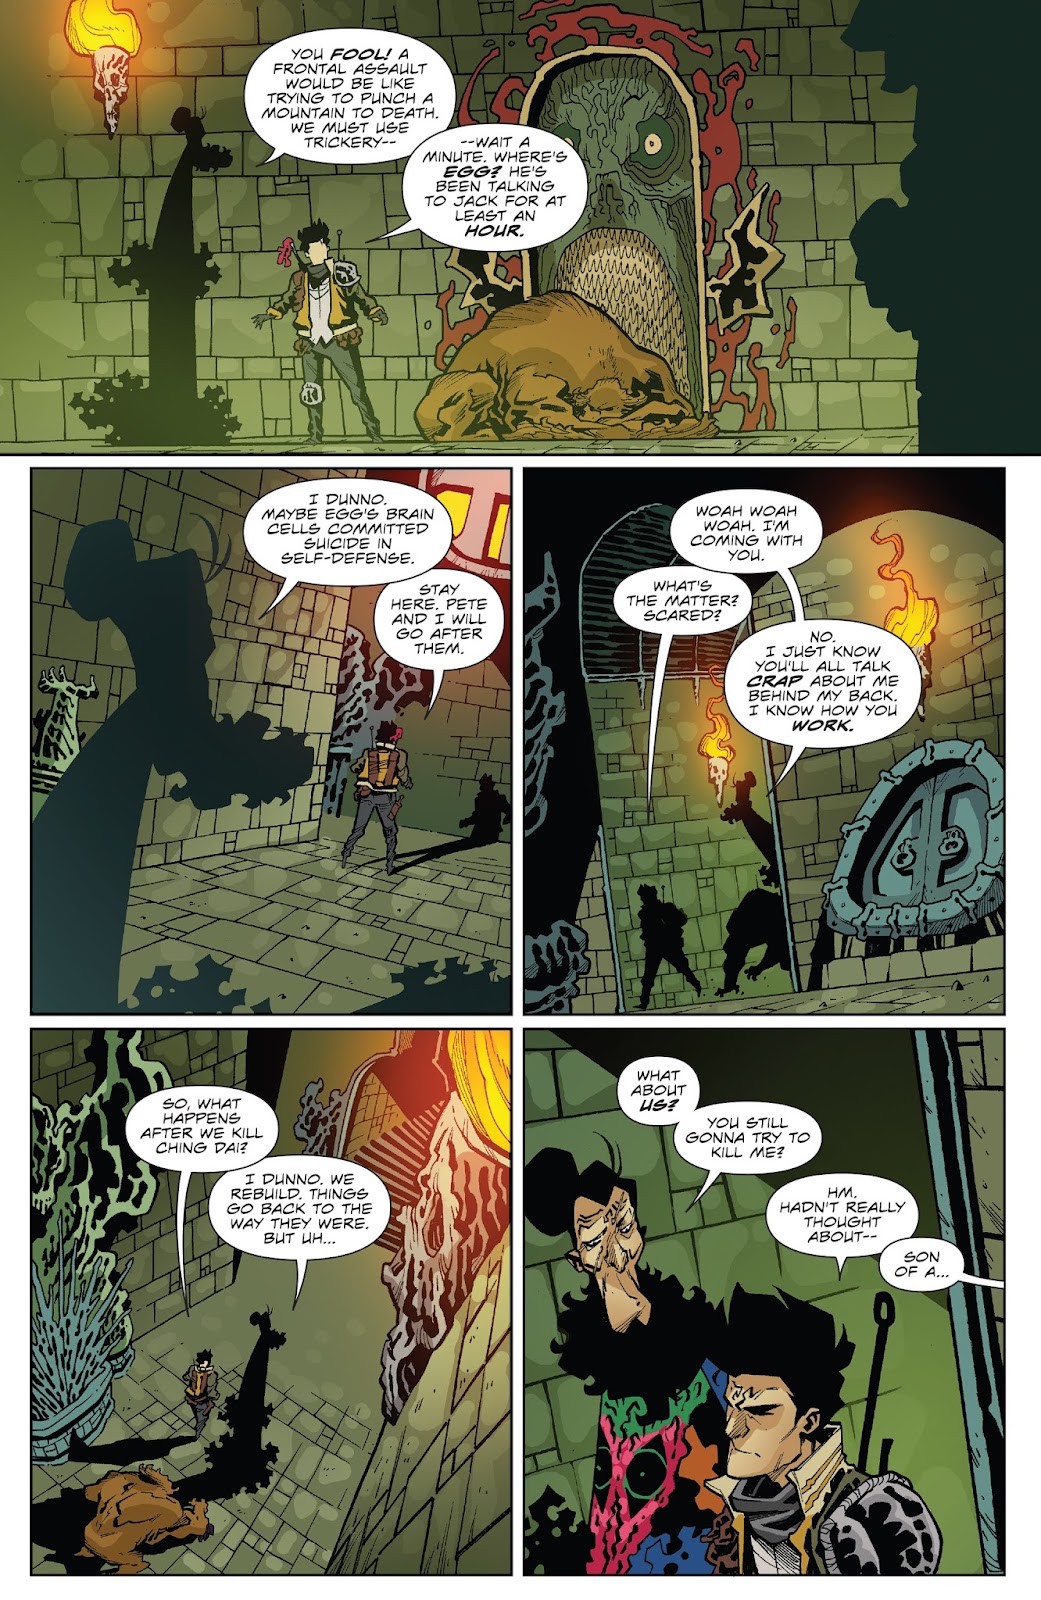 Big Trouble in Little China: Old Man Jack issue 8 - Page 7